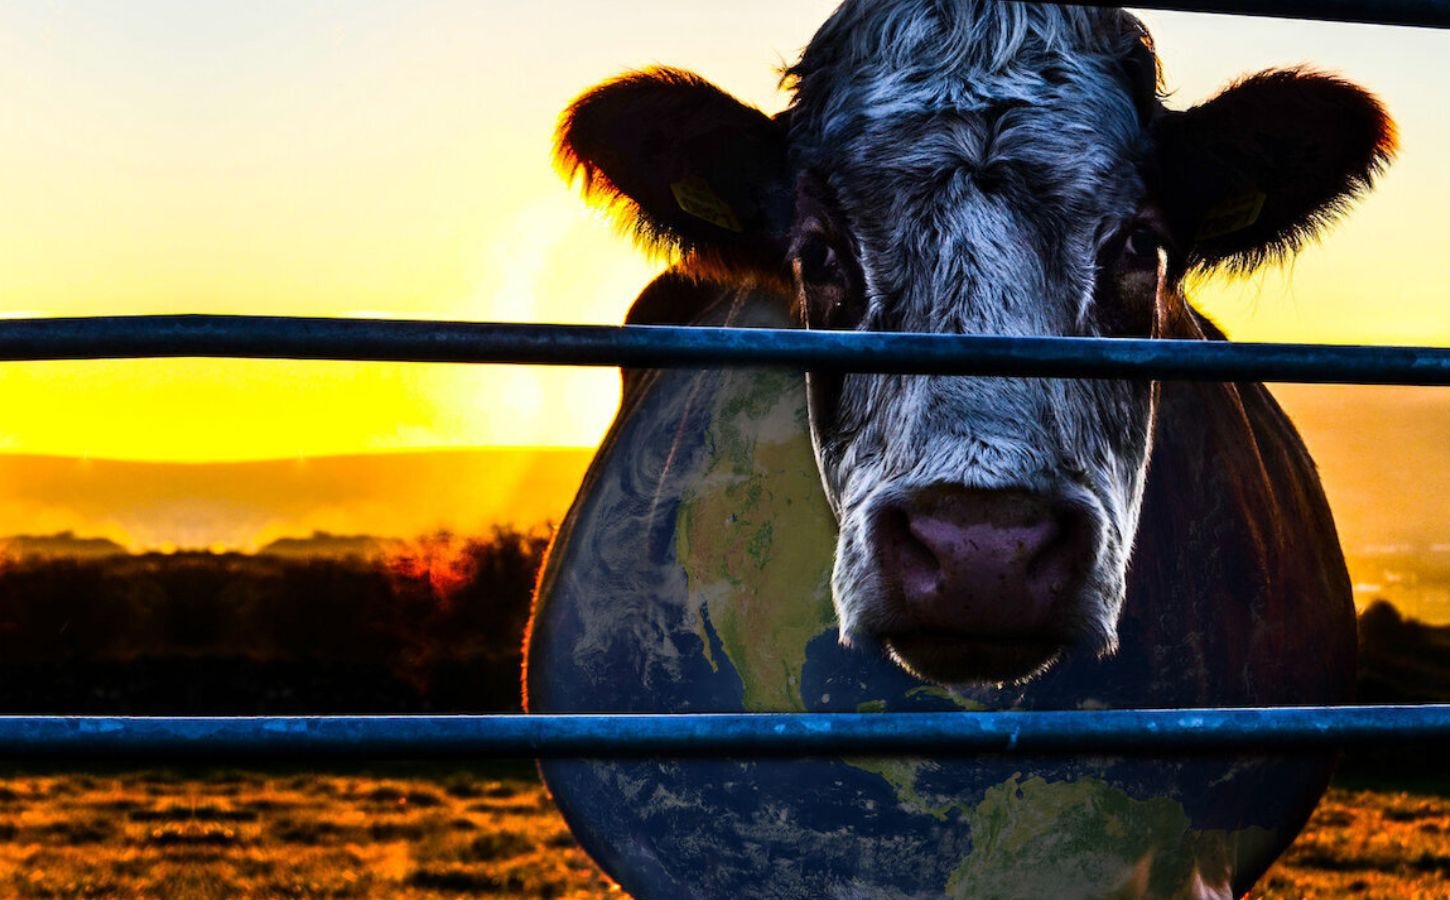 Cowspiracy Is The ‘Most Effective’ Vegan Documentary, Poll Finds